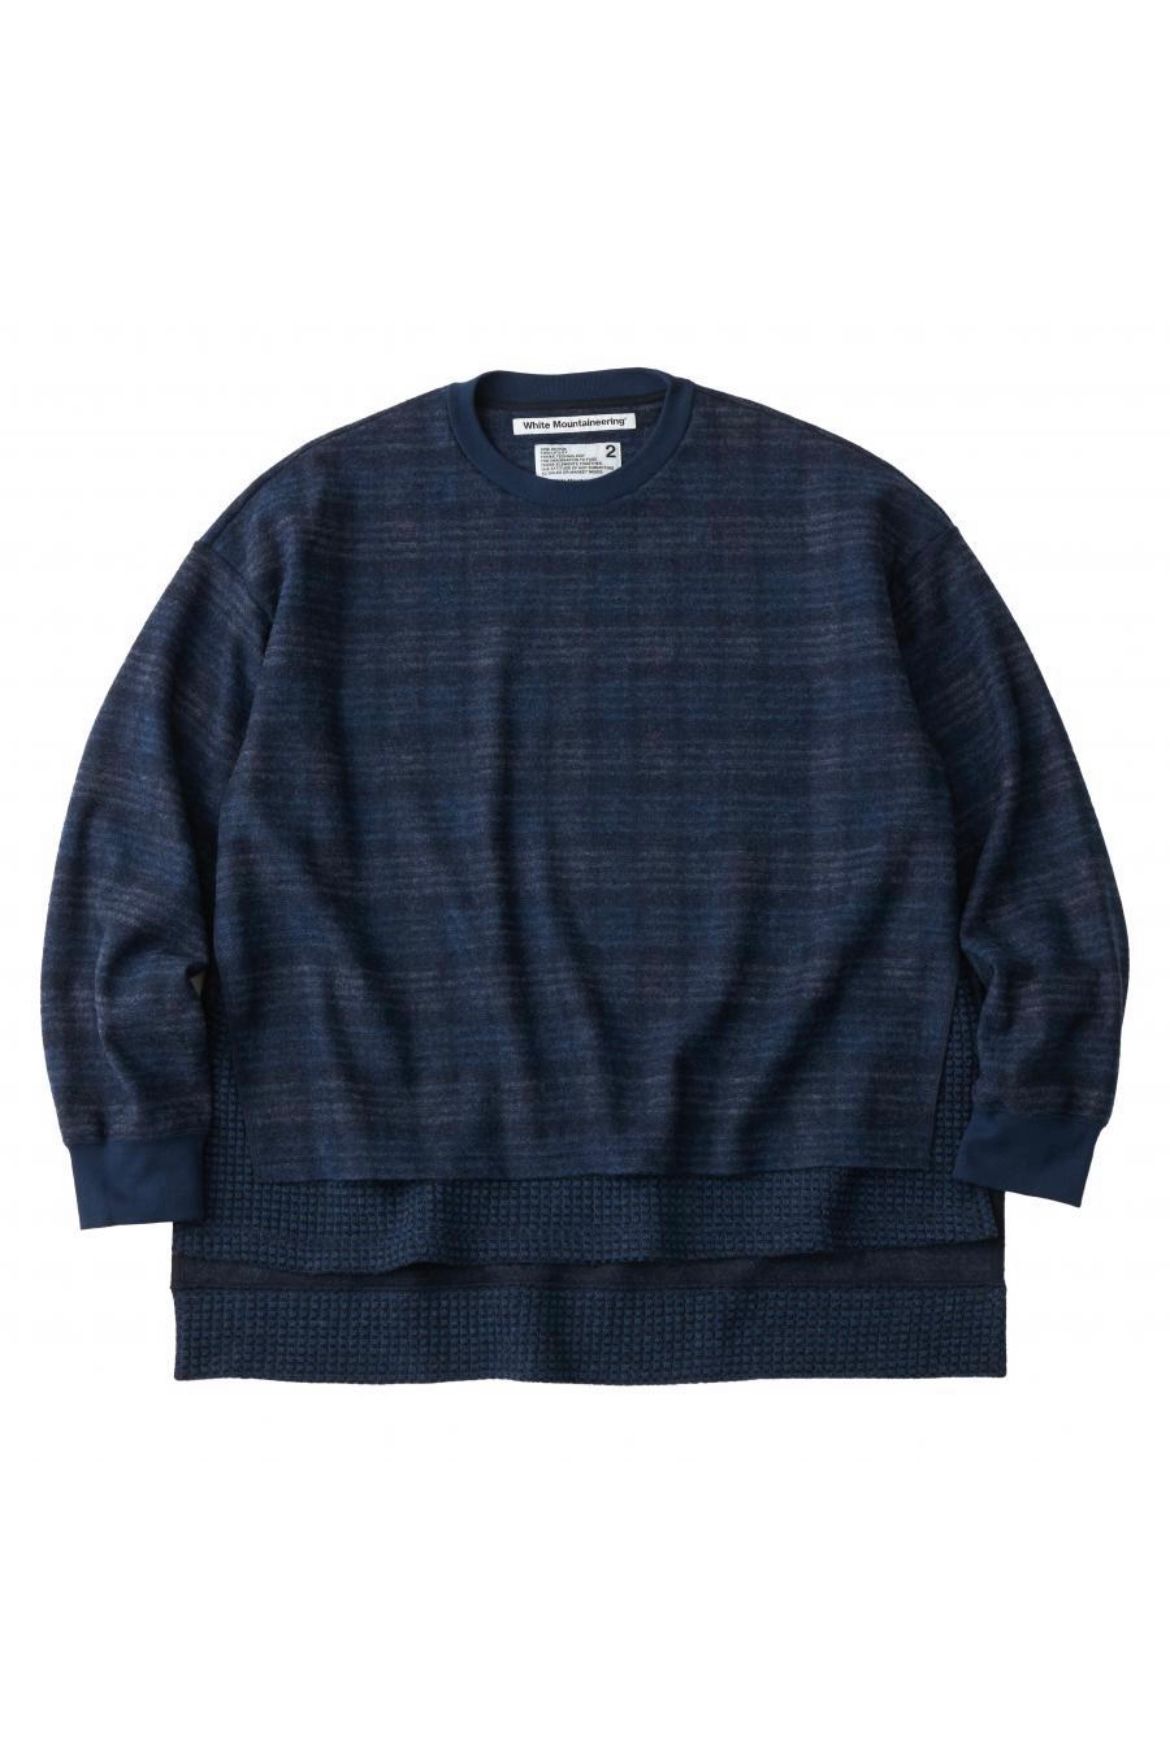 White Mountaineering - waffle layered check pullover -navy- 23aw